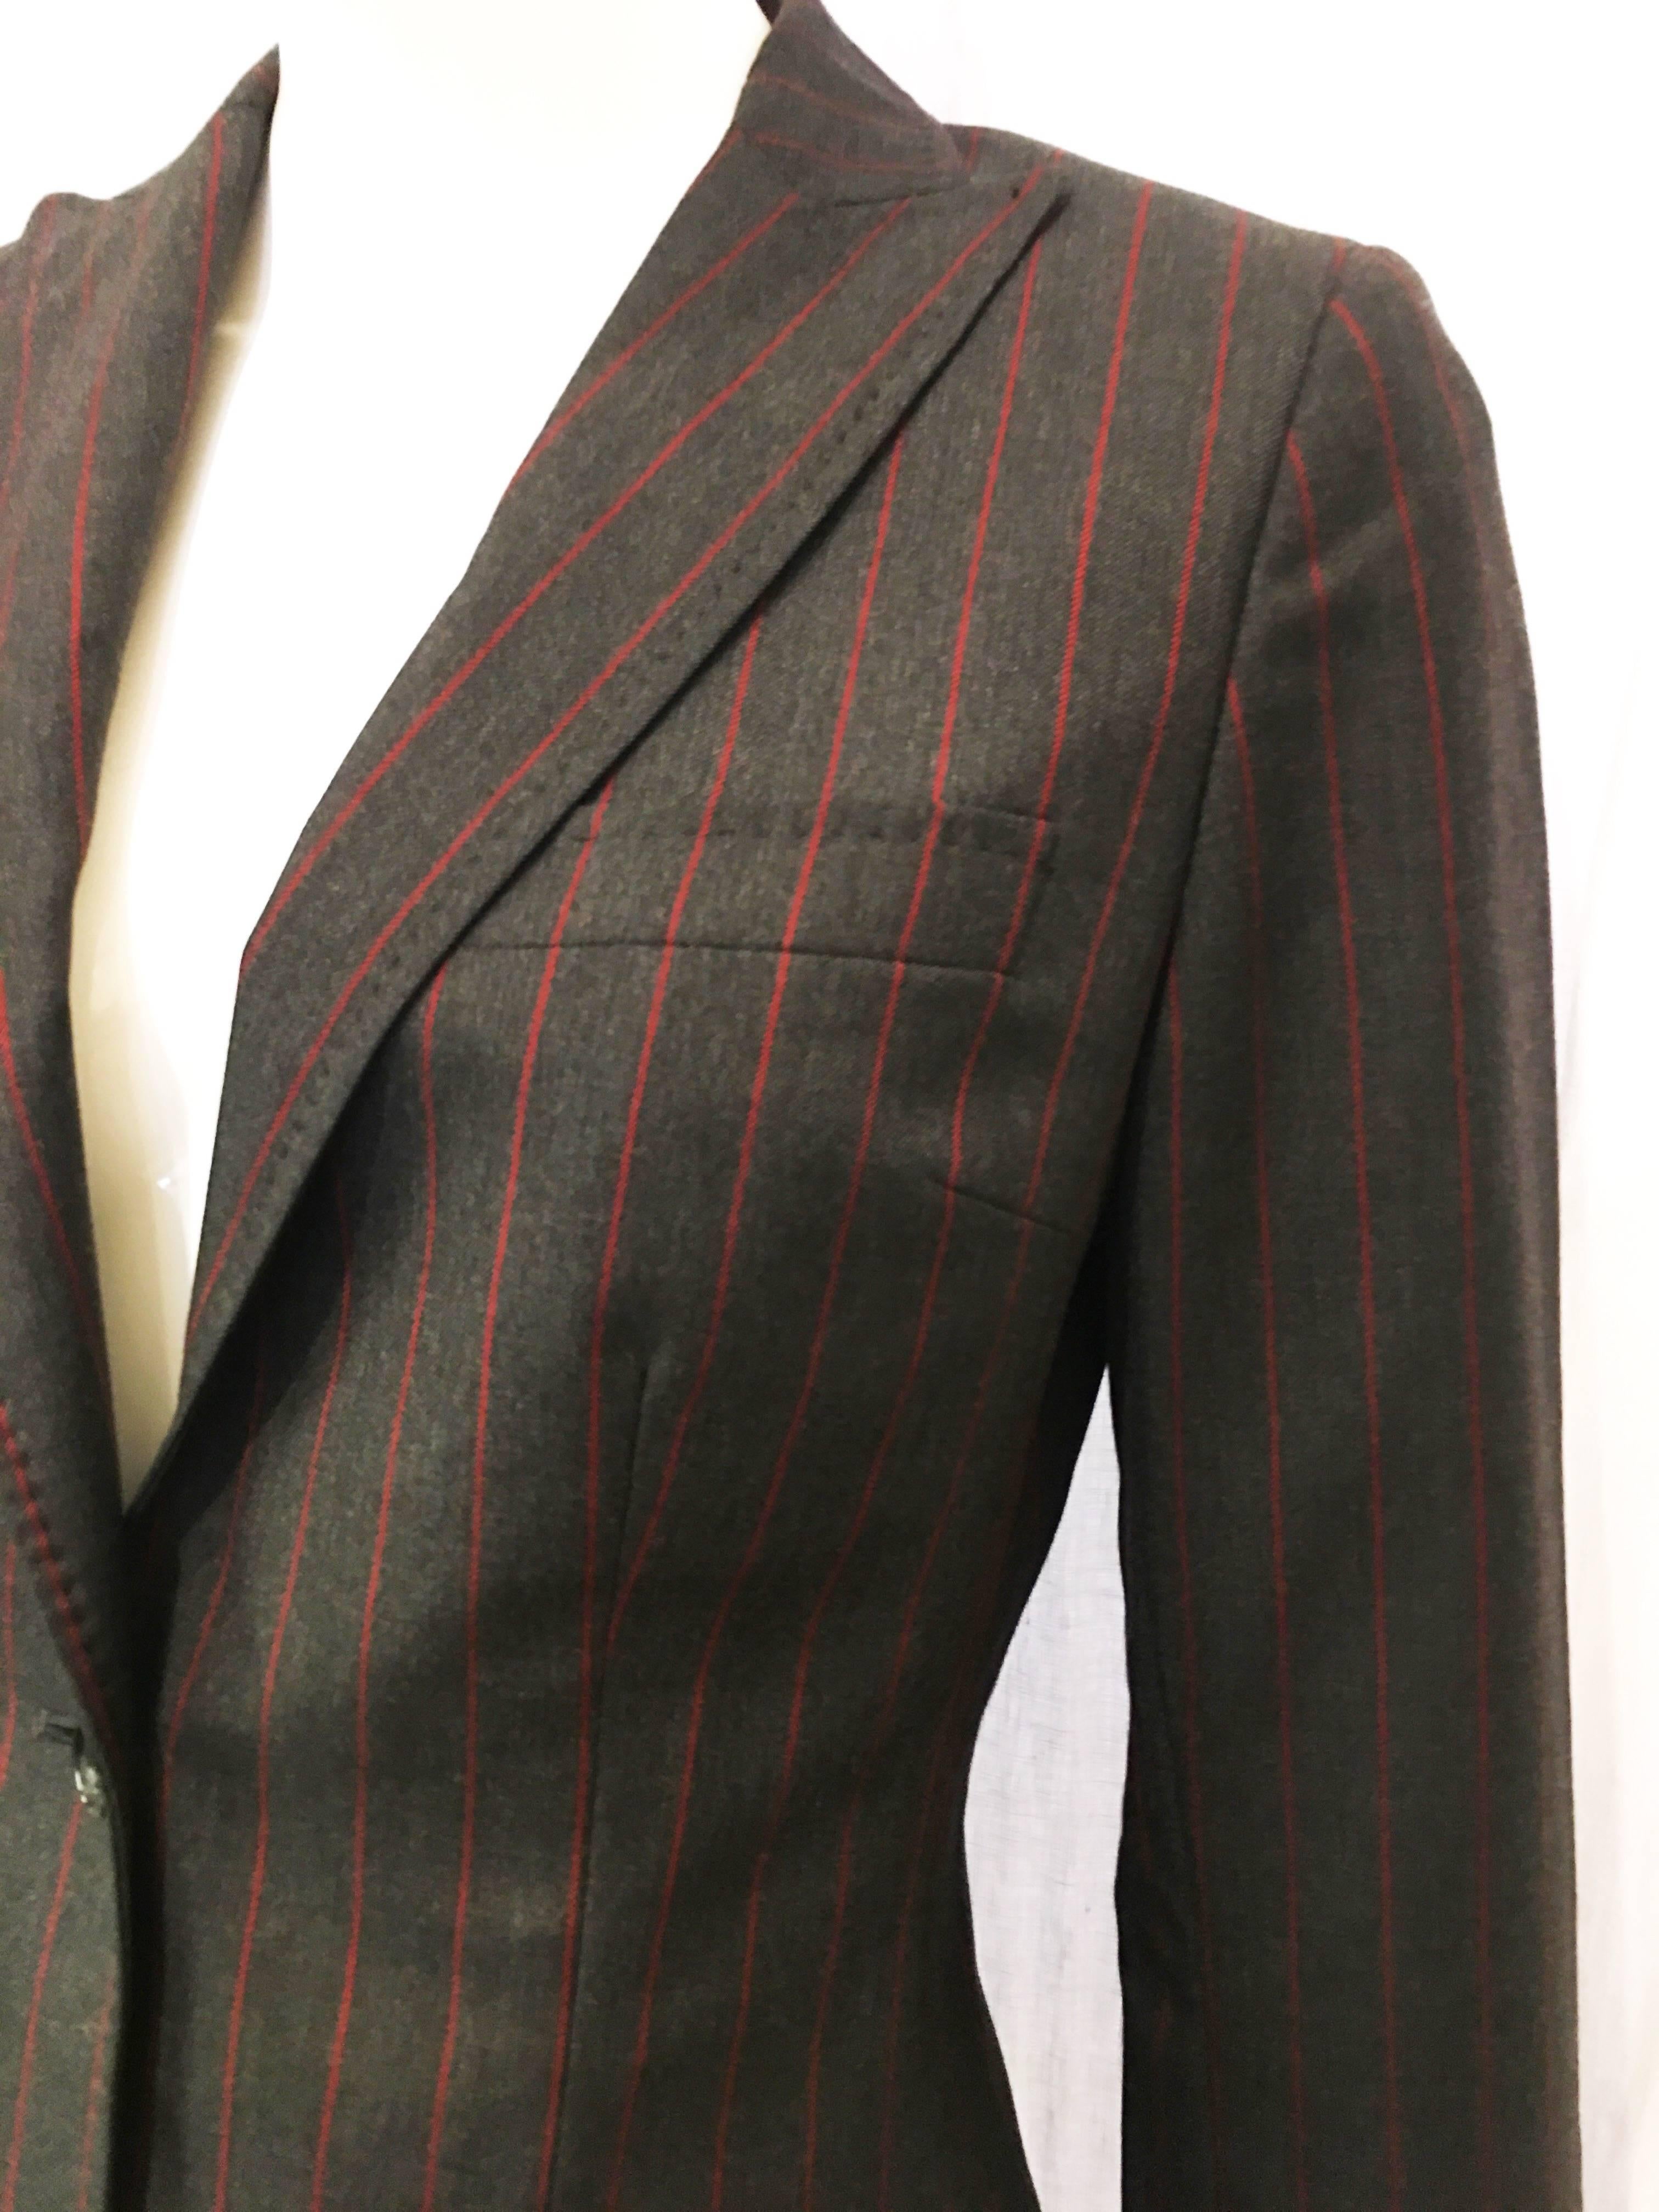 Gray wool blazer with red pinstripes. Sleek and simple design. Four pockets on front of garment- one on left breast, one on left hip, and two at right hip. Jacket is lined with red silk emblazoned with allover Dolce & Gabbana logo. Plaque on chain